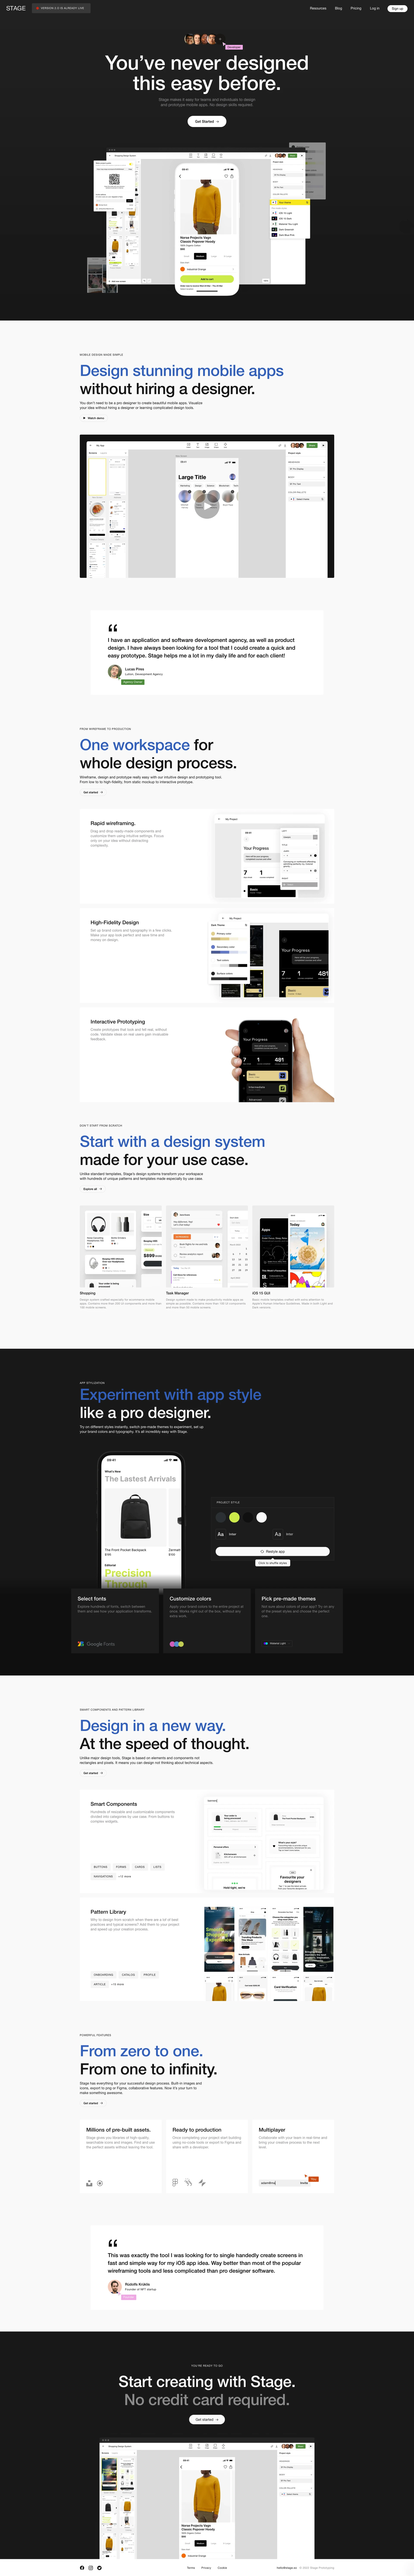 Stage Landing Page Example: Design and prototype mobile apps easier than ever. No design or code skills required.